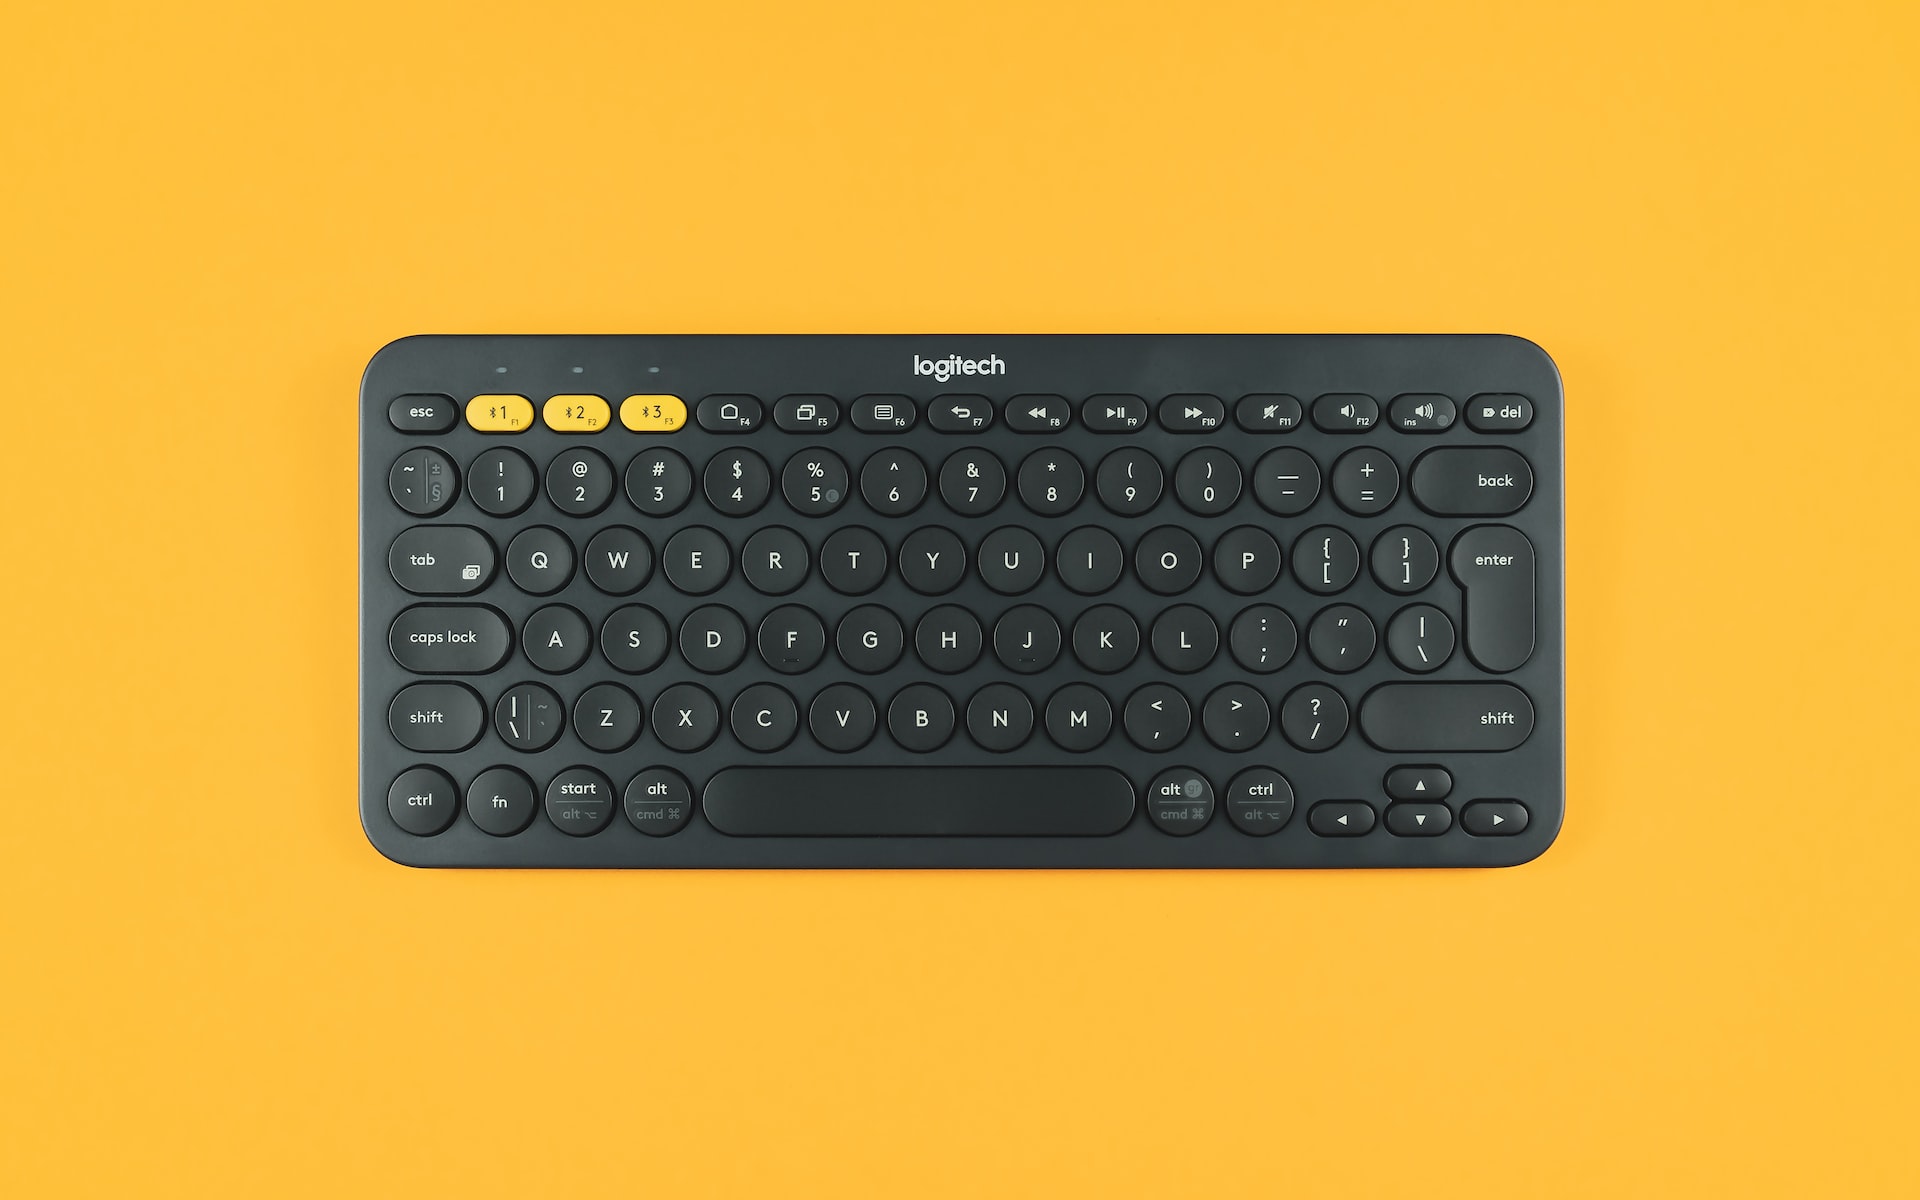 logitech keyboards featured image Unslider | Laptop Reviews & Buying Guides